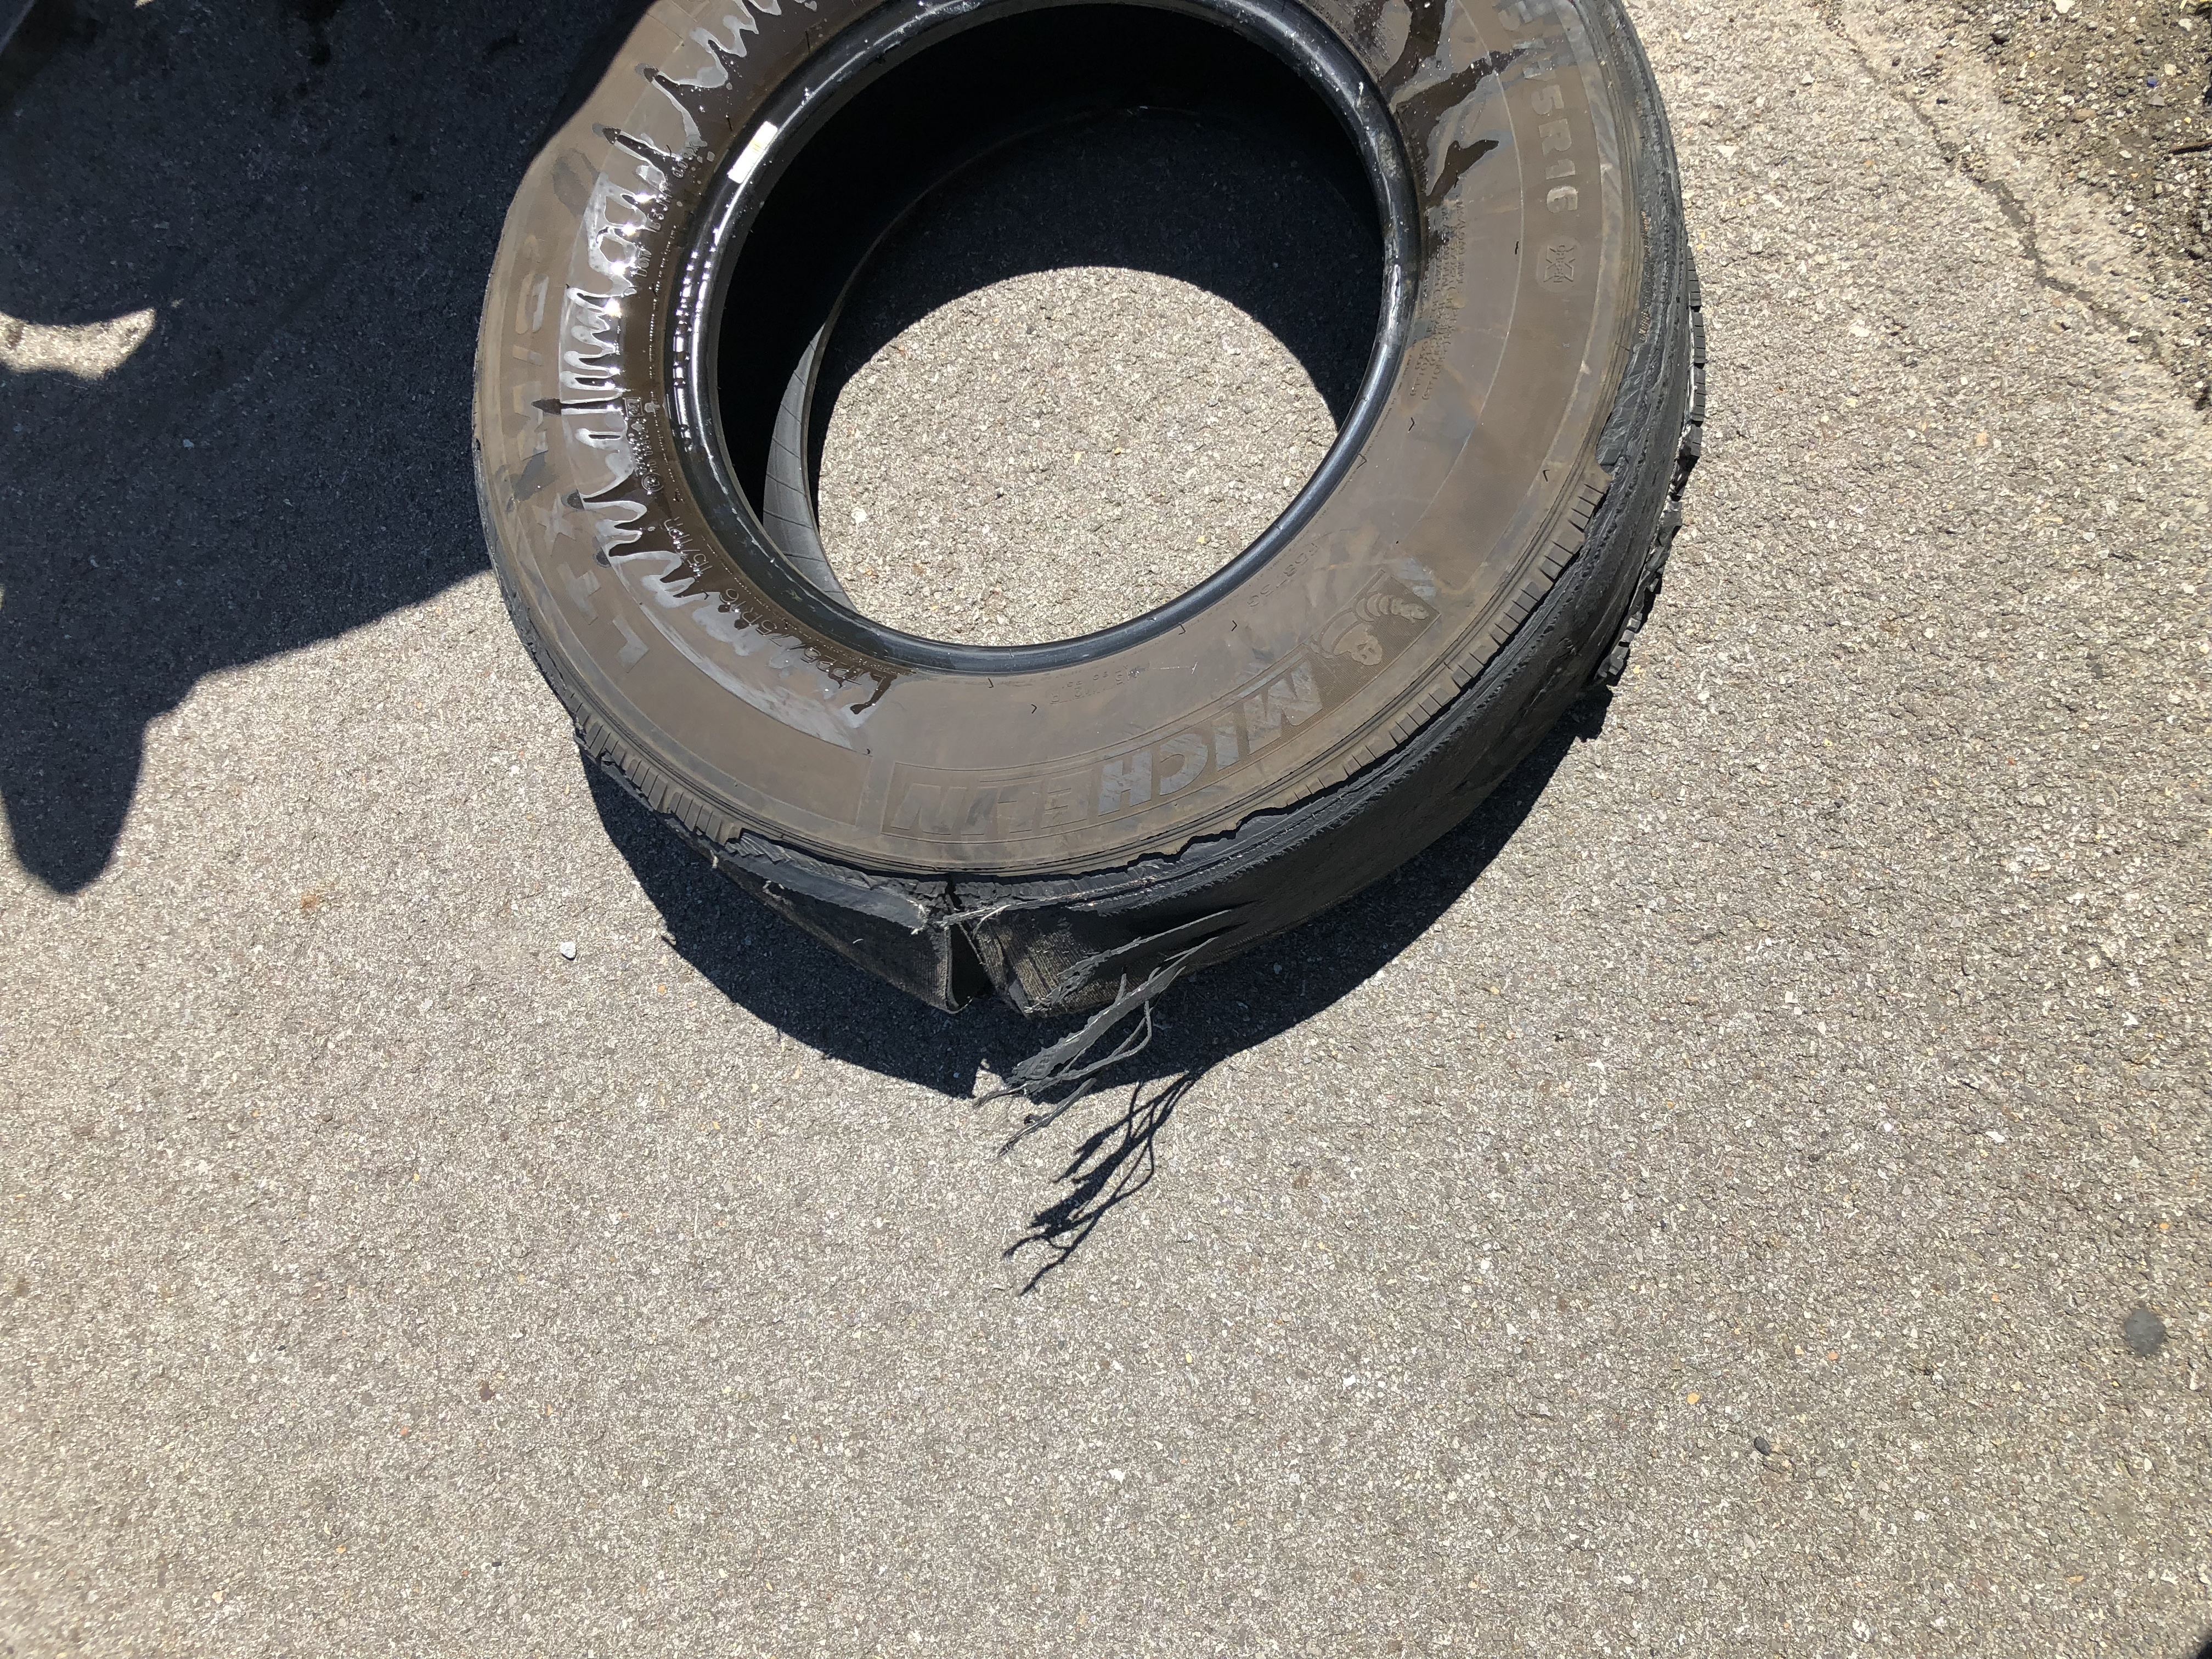 Tire Blowout Experience - Tires - FMCA RV Forums – A Community of RVers